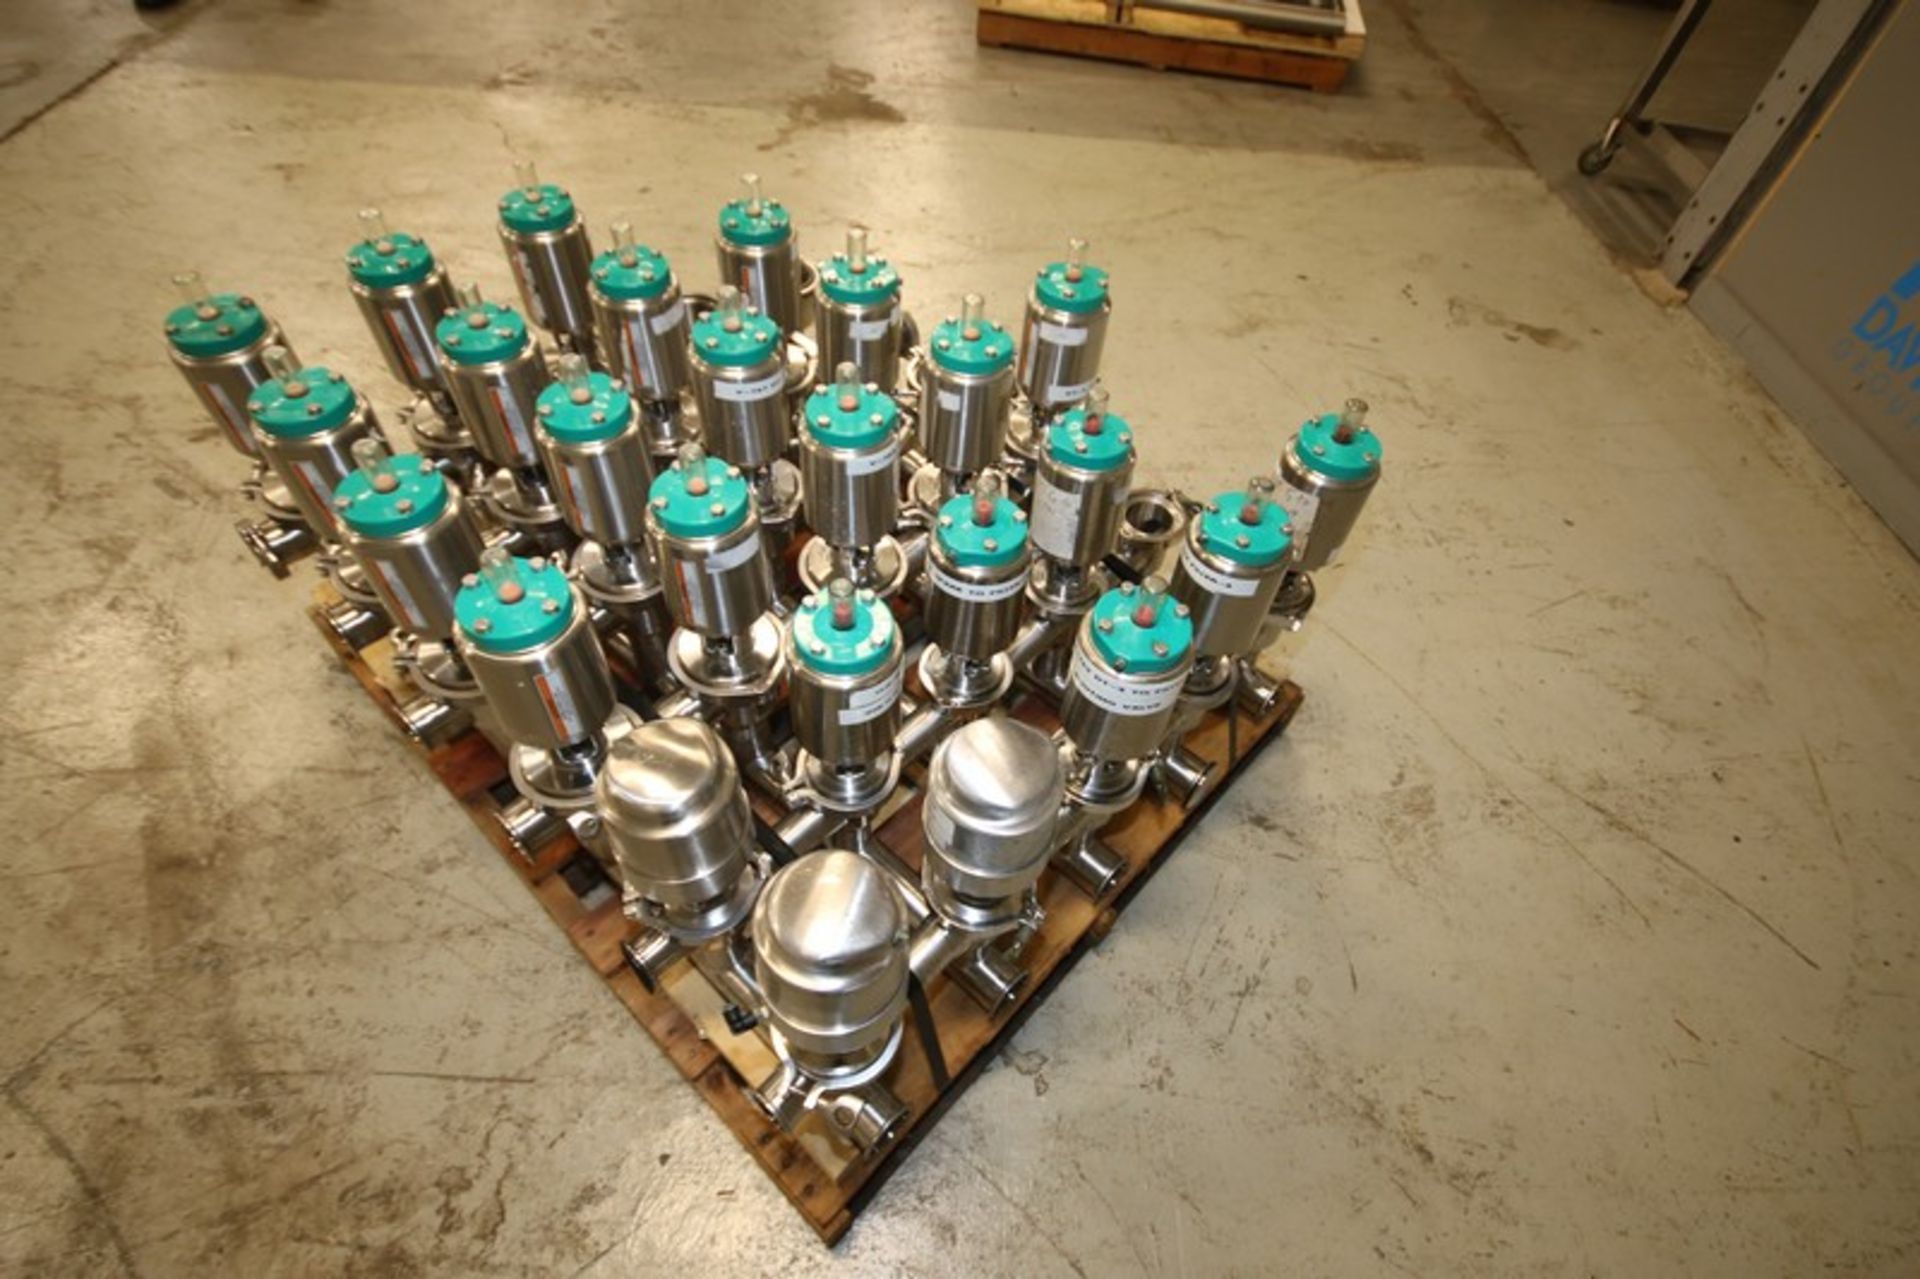 Tri Clover 2.5" (30) Valve S/S Air Valve Cluster, with Model 761 & 361 Valves (INV#69876) (Located @ - Image 4 of 7